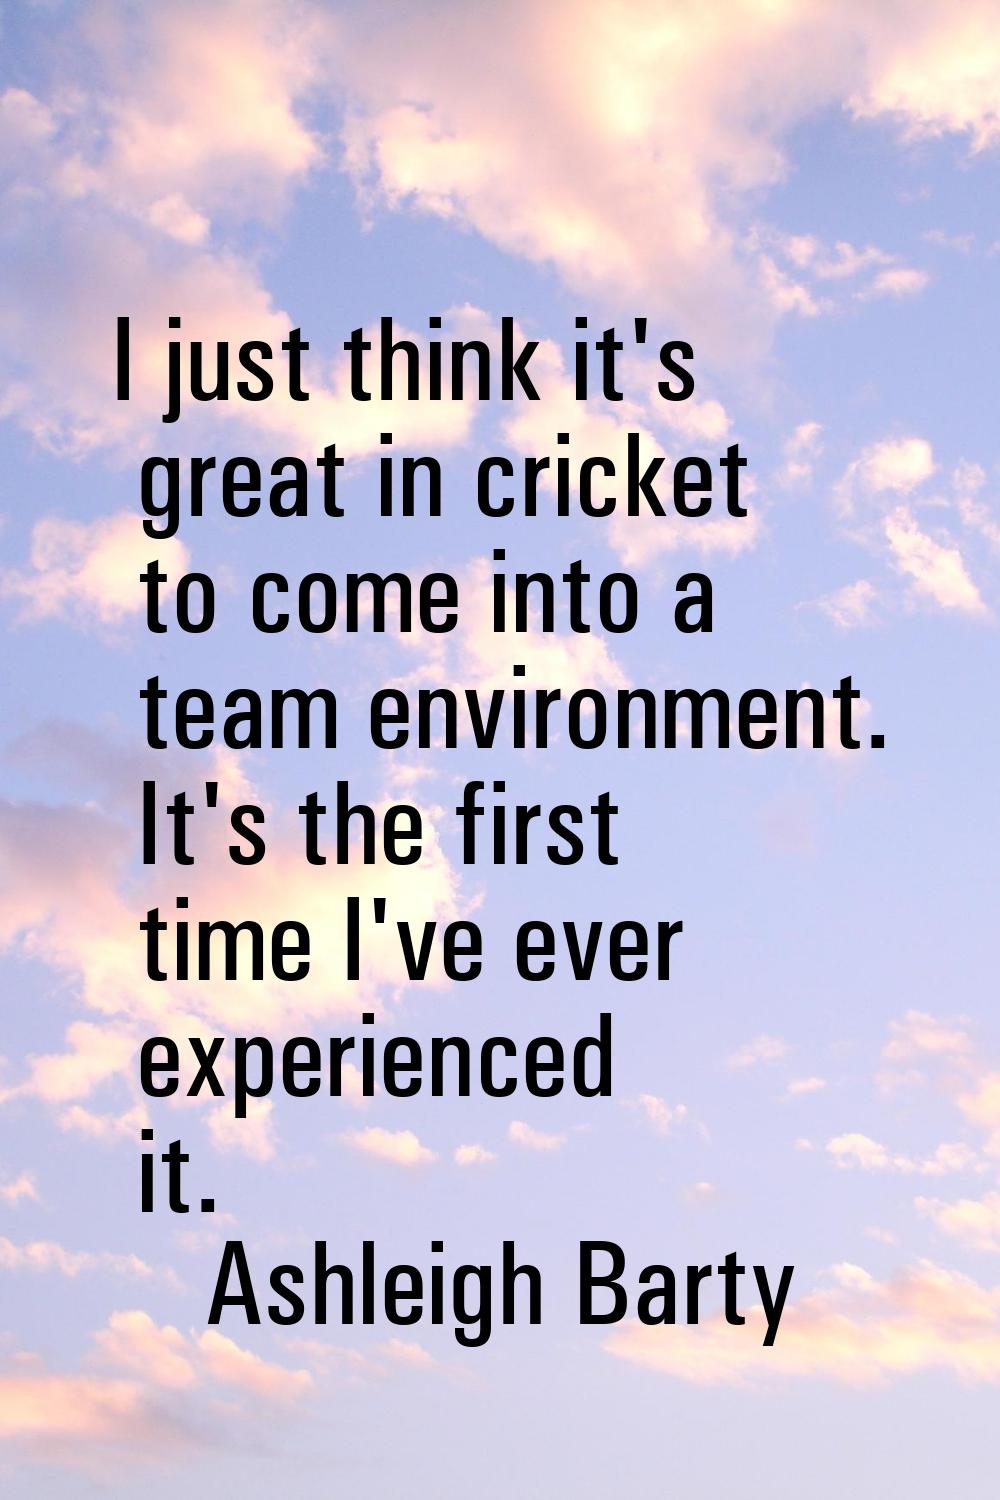 I just think it's great in cricket to come into a team environment. It's the first time I've ever e